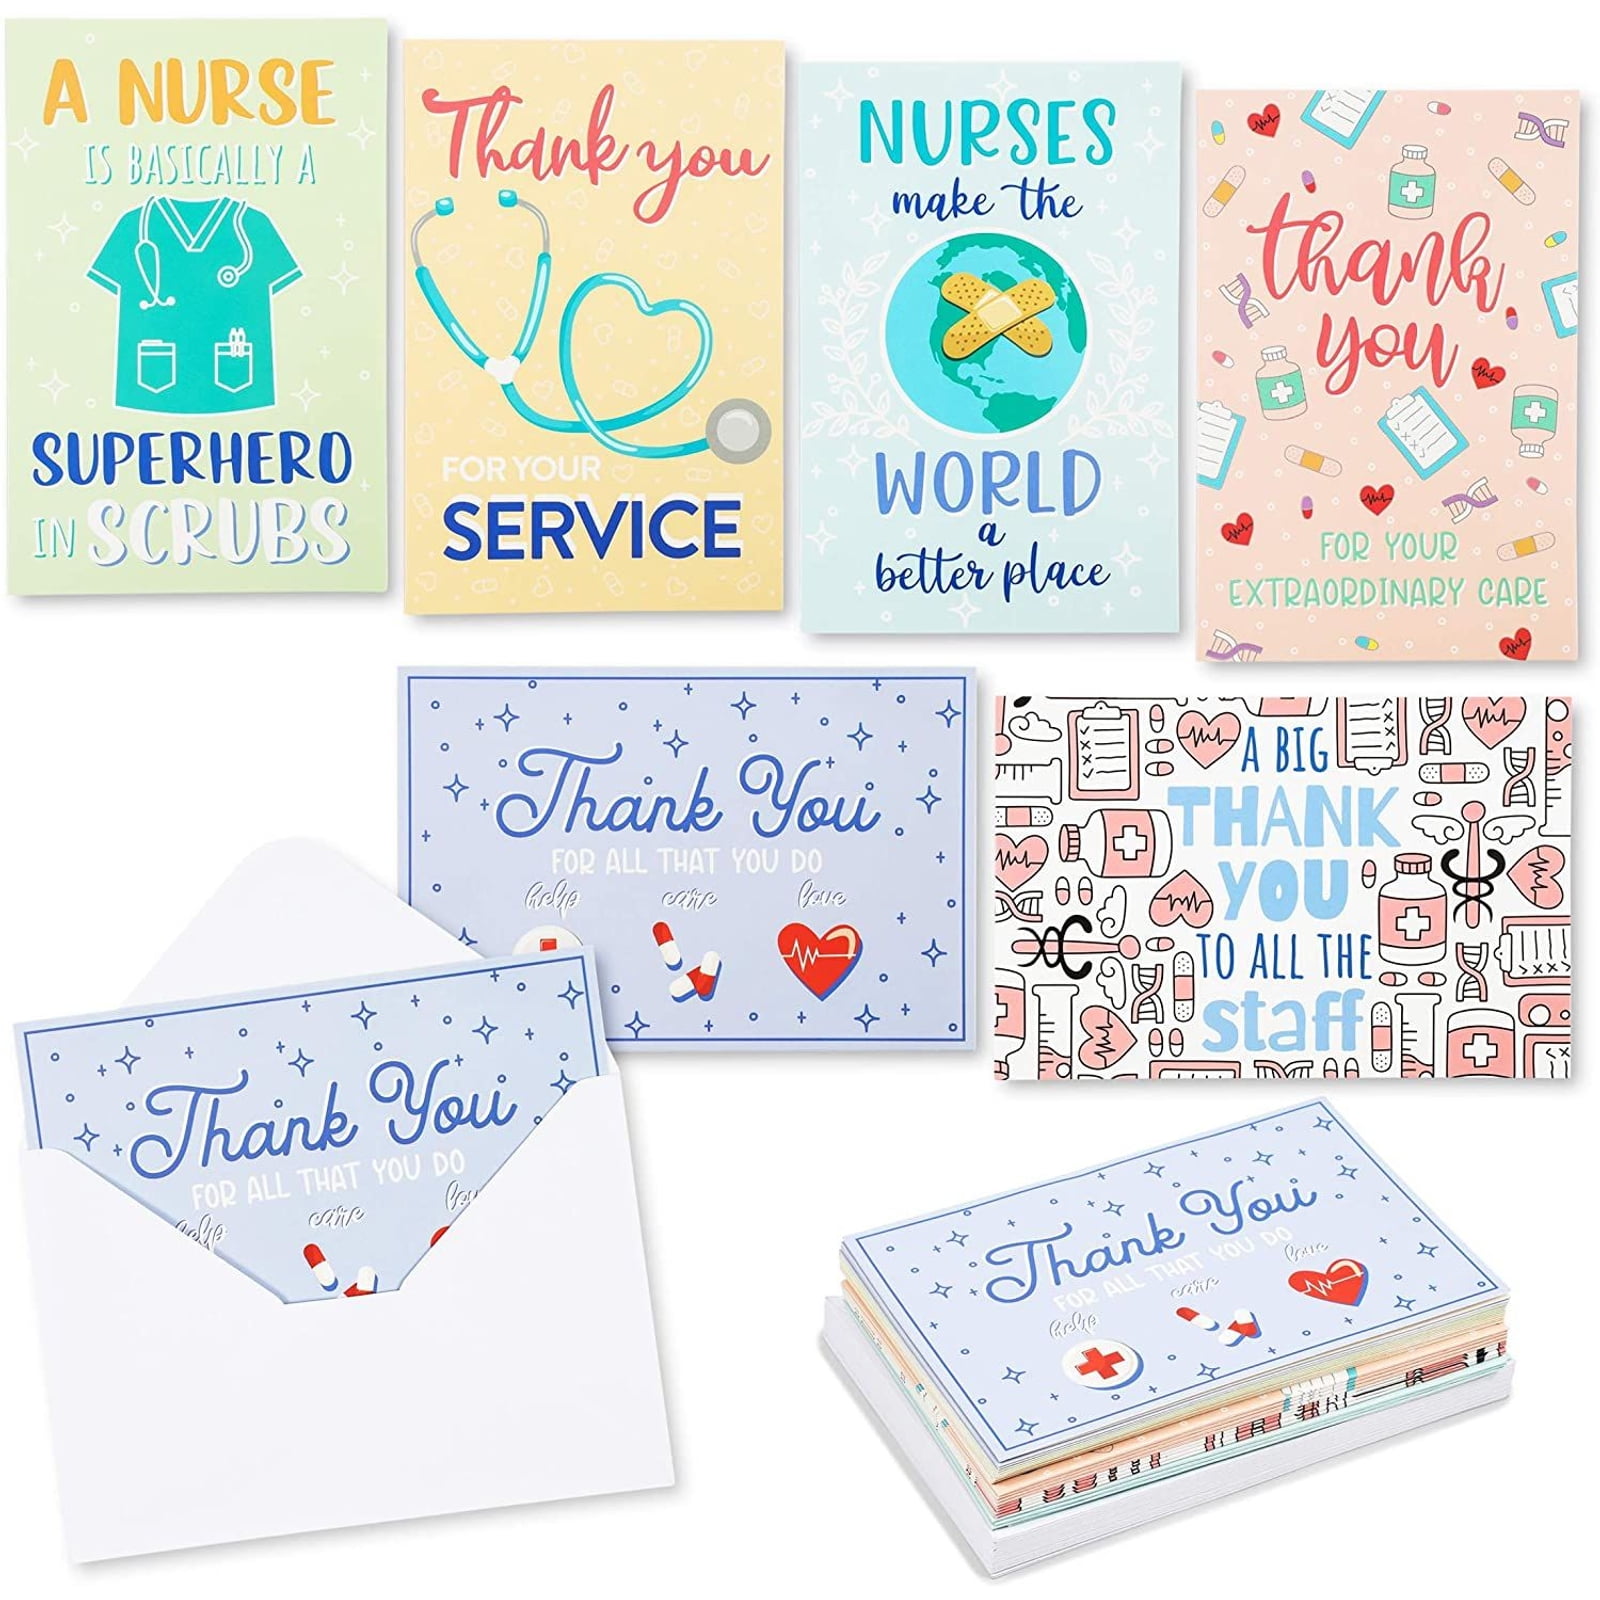 A special Thank you to special doctor Dr card greetings blank nurse hospital 1 